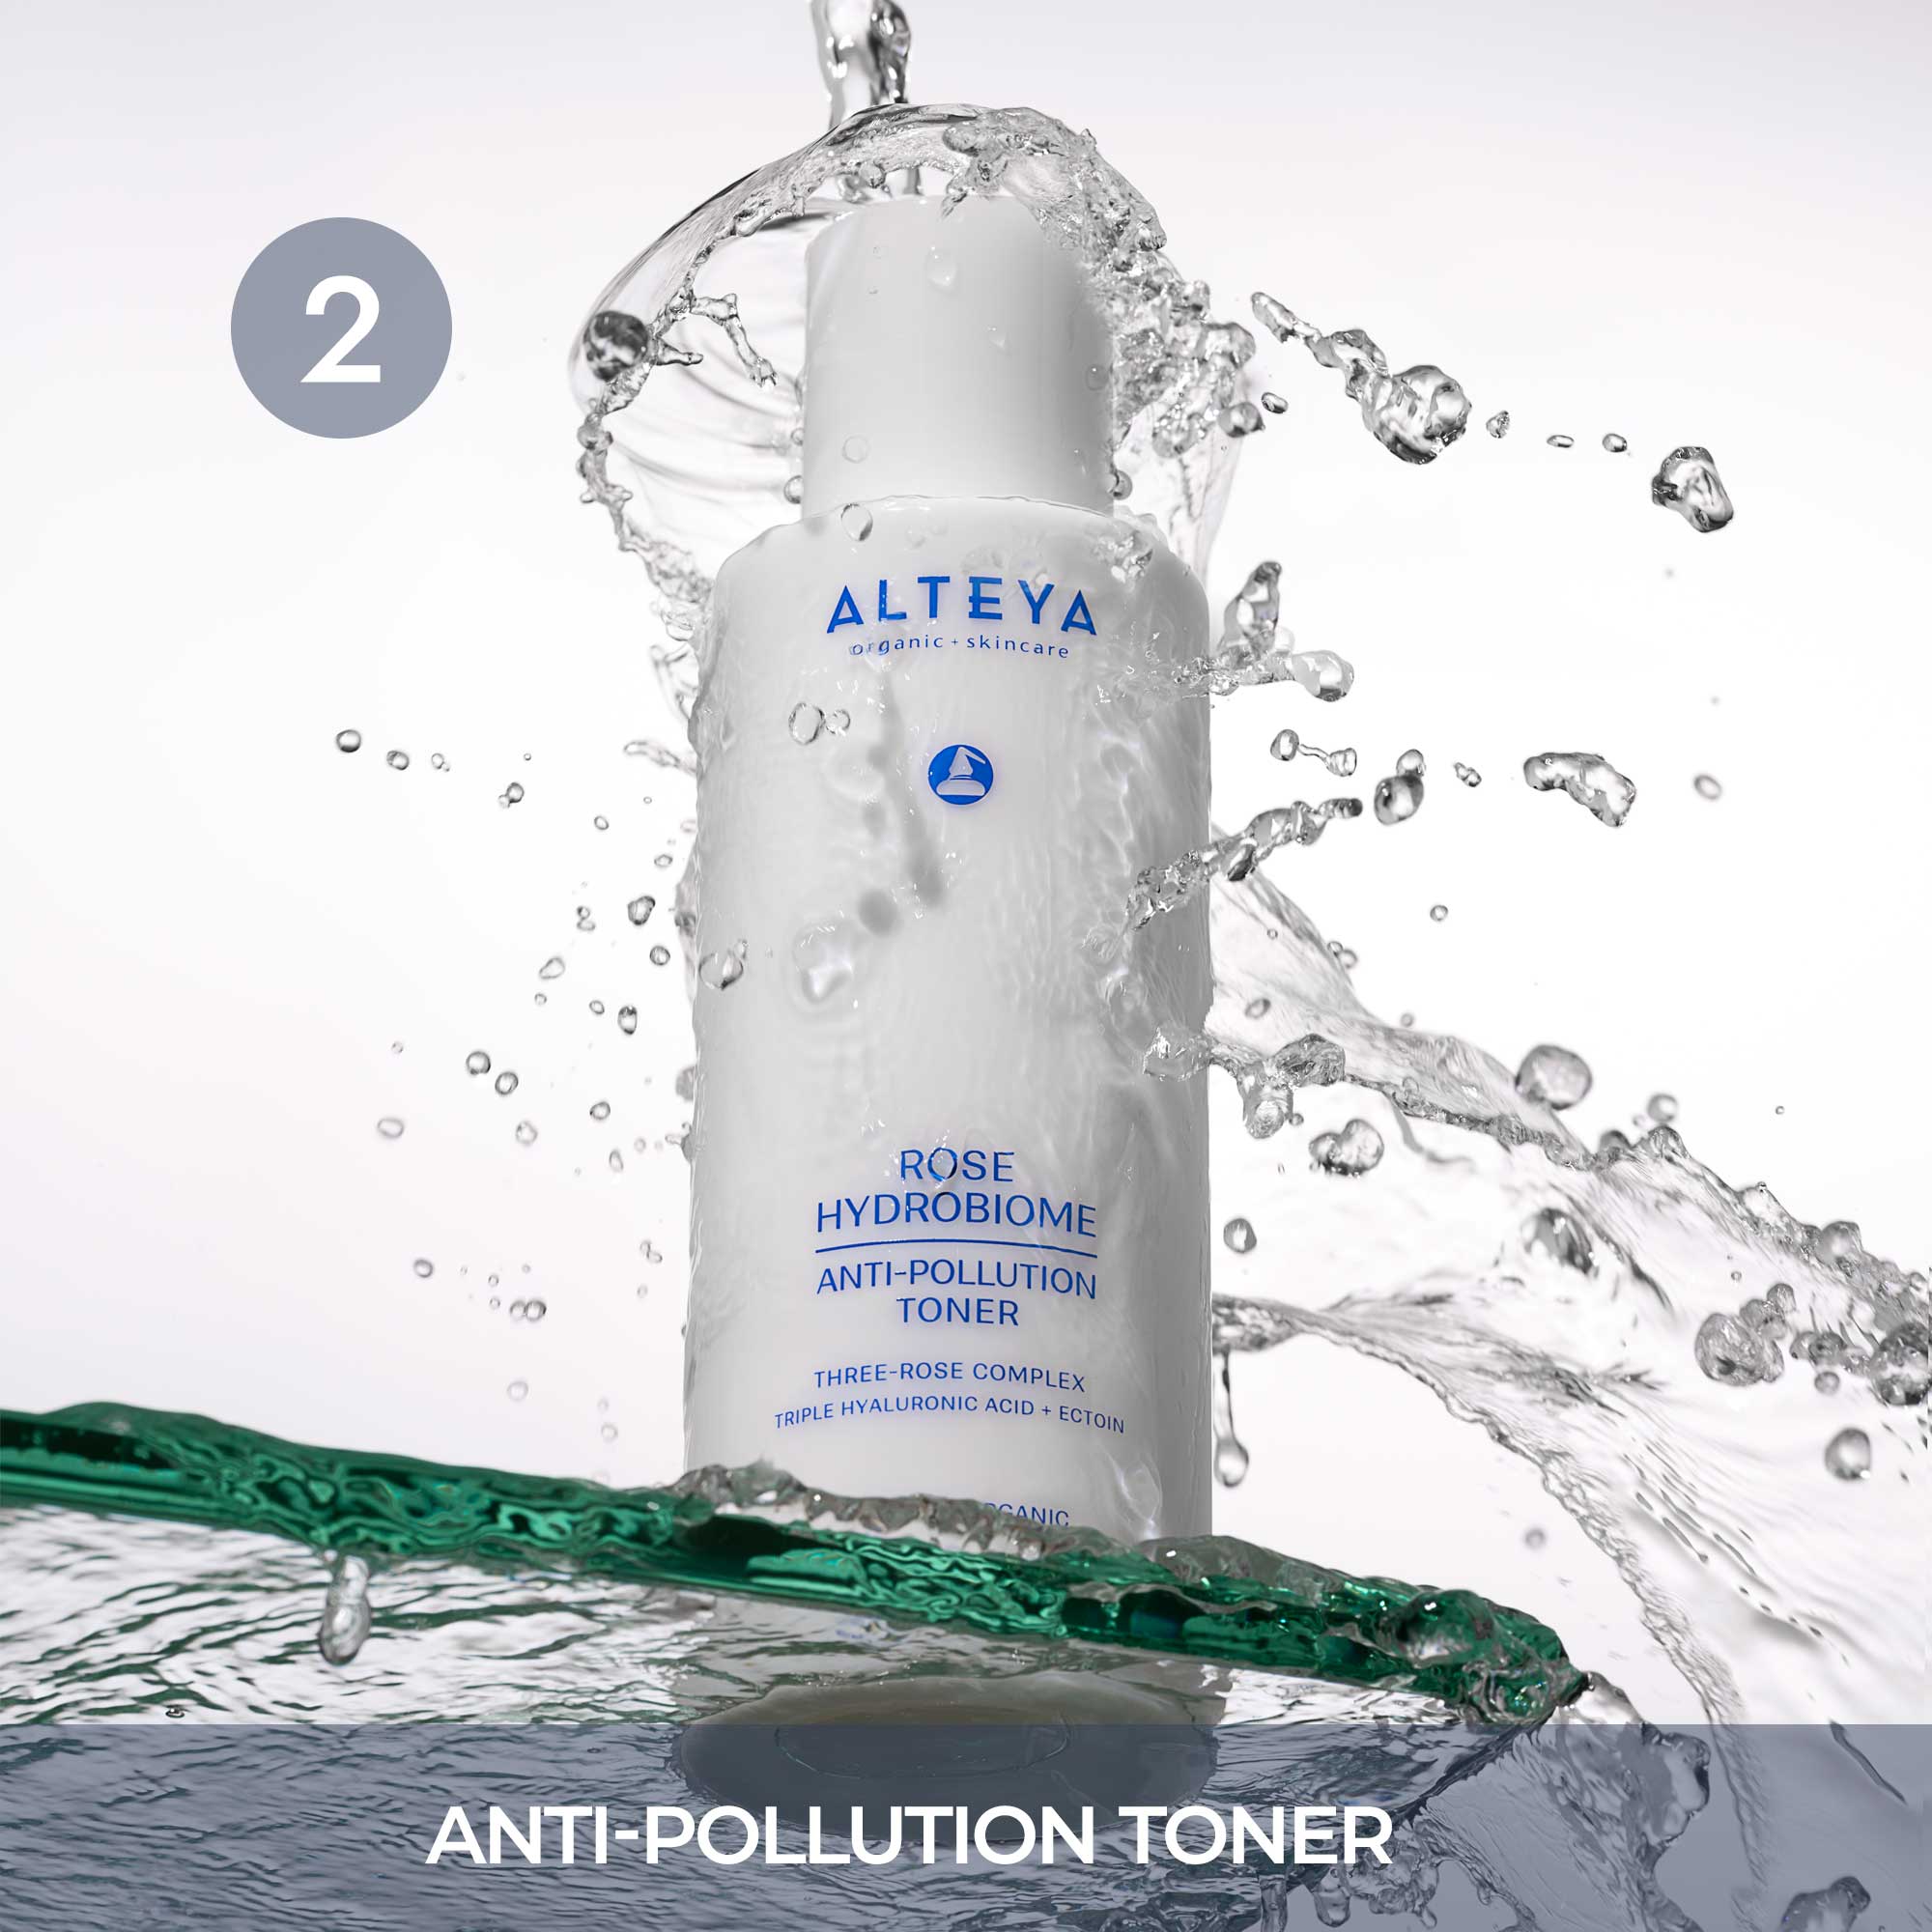 A bottle of anti pollution toner with a splash of water.